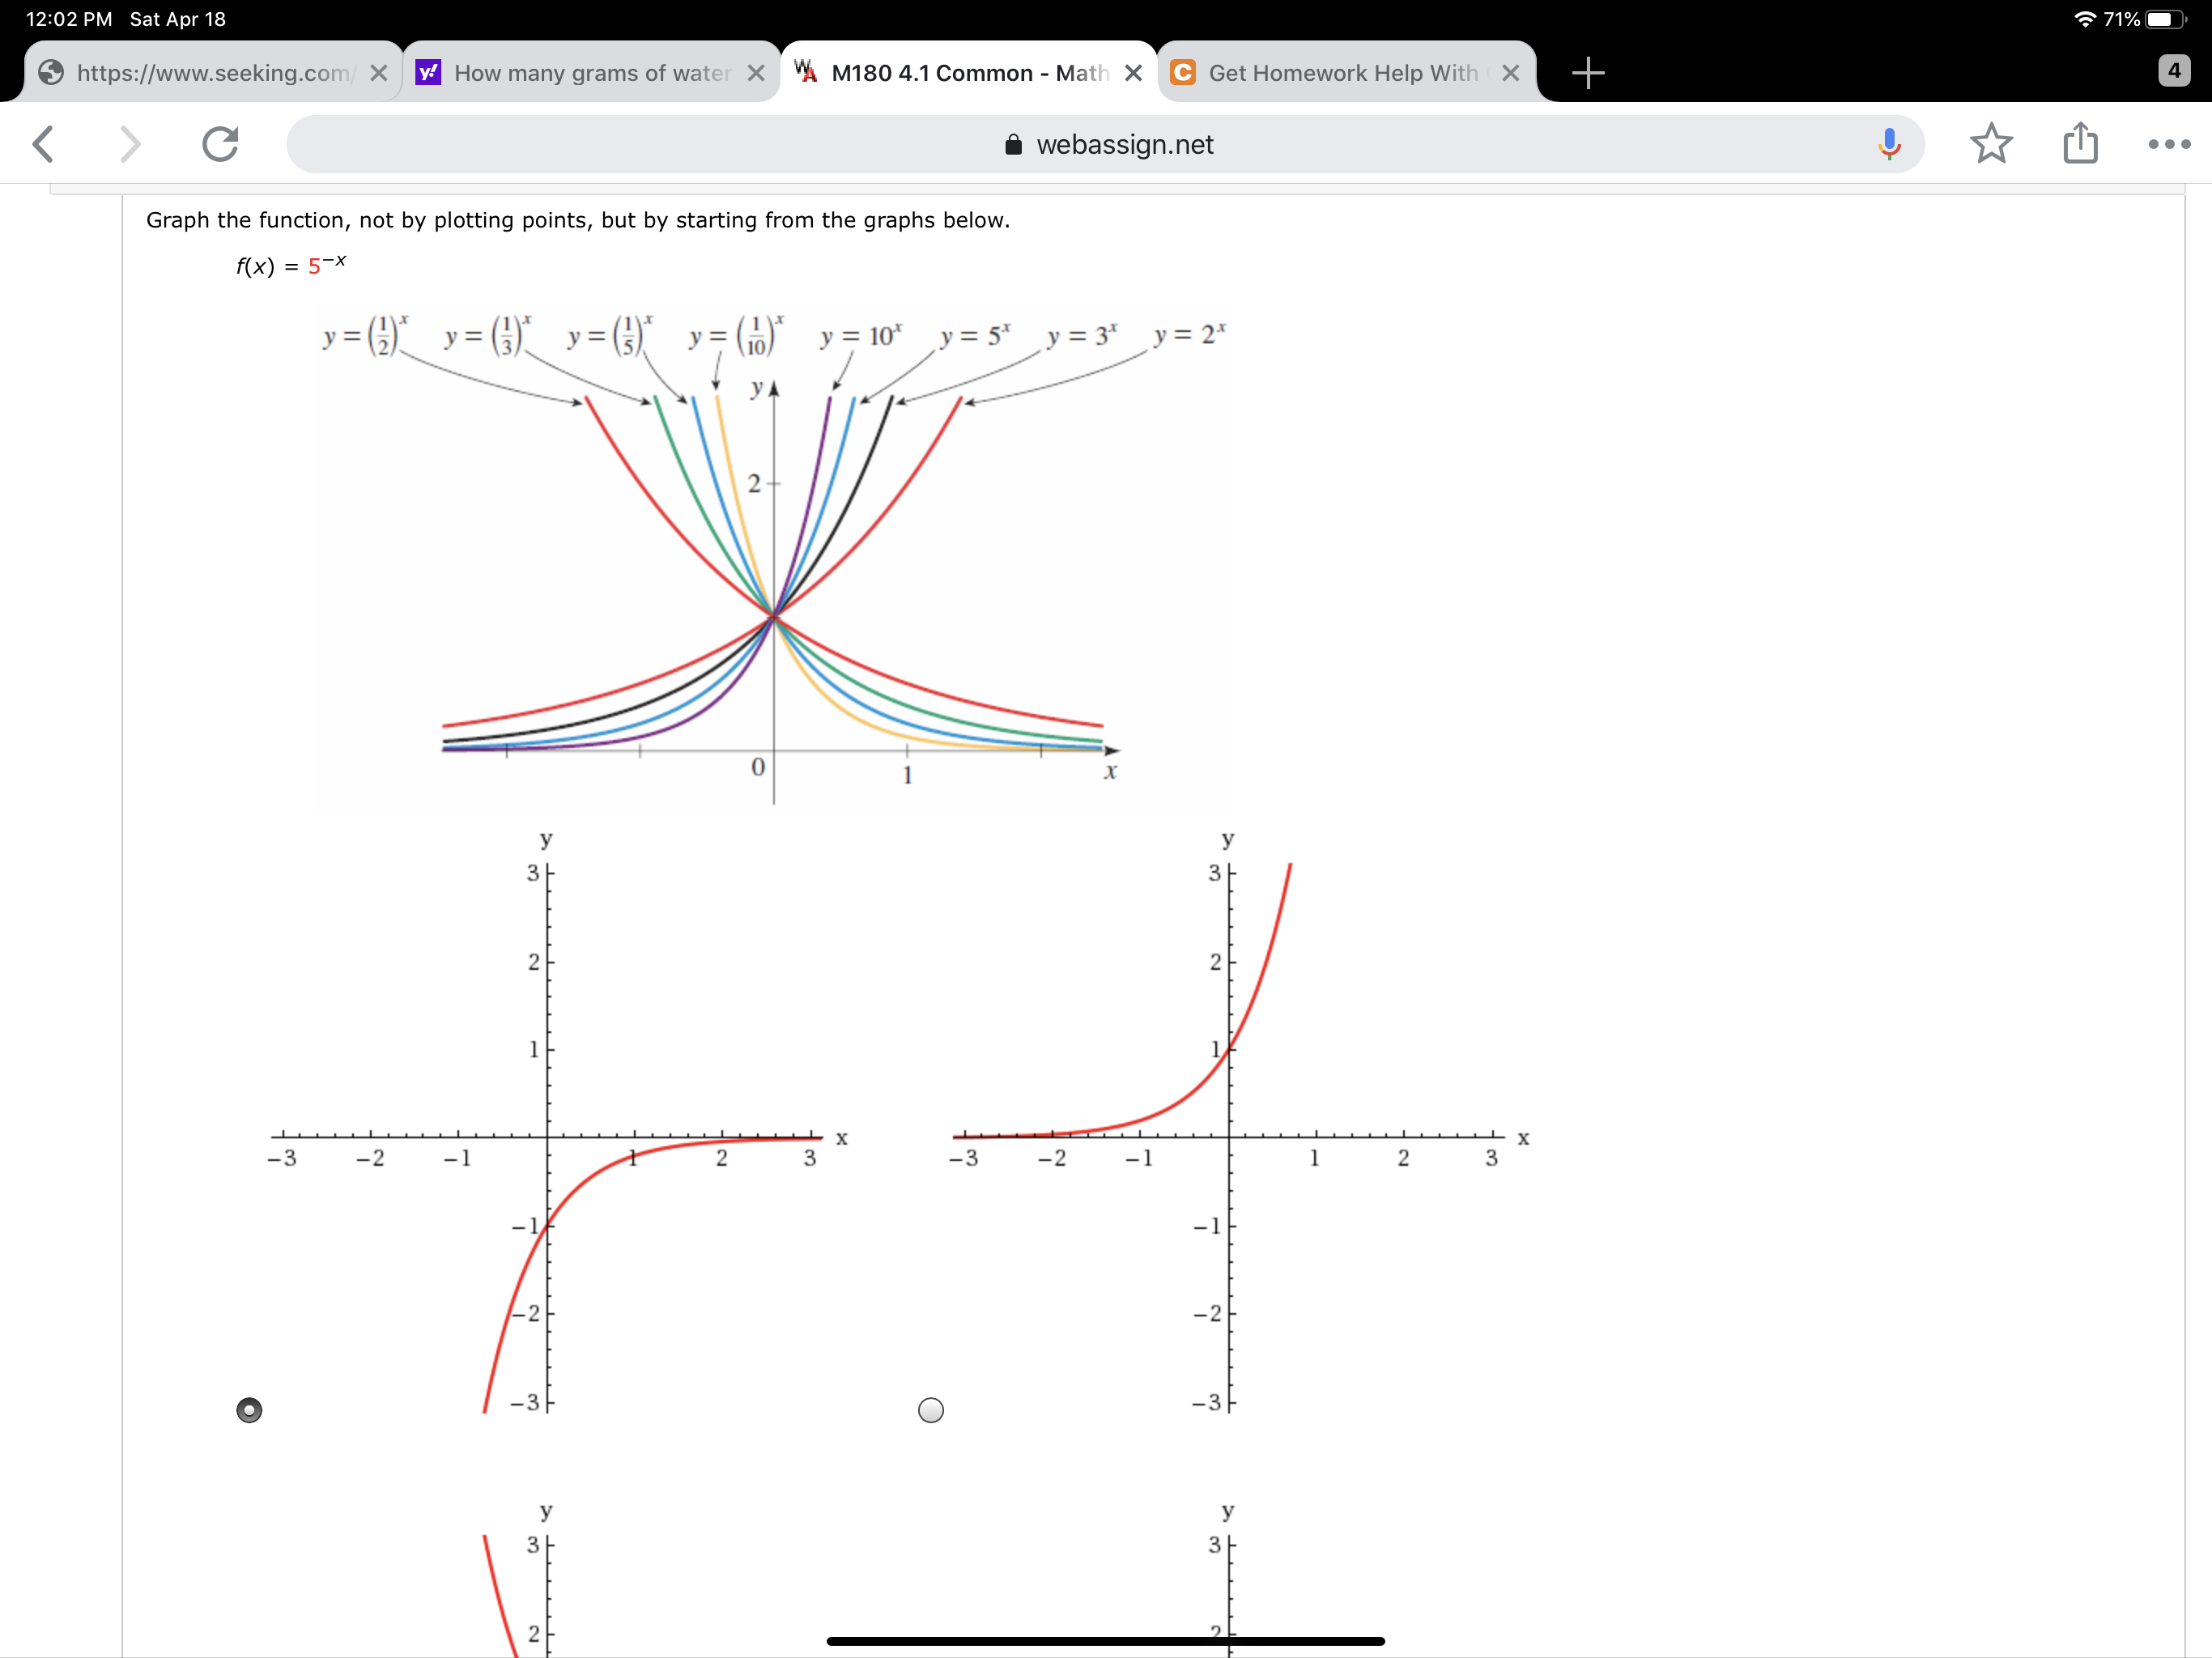 12:02 PM Sat Apr 18
* 71%
https://www.seeking.com/ X
y How many grams of water X A M180 4.1 Common - Math X C Get Homework Help With X
4
<>
webassign.net
Graph the function, not by plotting points, but by starting from the graphs below.
f(x) = 5-x
y= (}"_ (}) y=})
= (9)*
y = (10)
y = 10* y = 5* y = 3* y = 2*
y =
УА
2-
y
У
3
2
х
-3
-2
-1
3
-3
-2
-1
3
-1
|-2
-3-
-3
У
y
3
3
2.
2.
2.
-1
